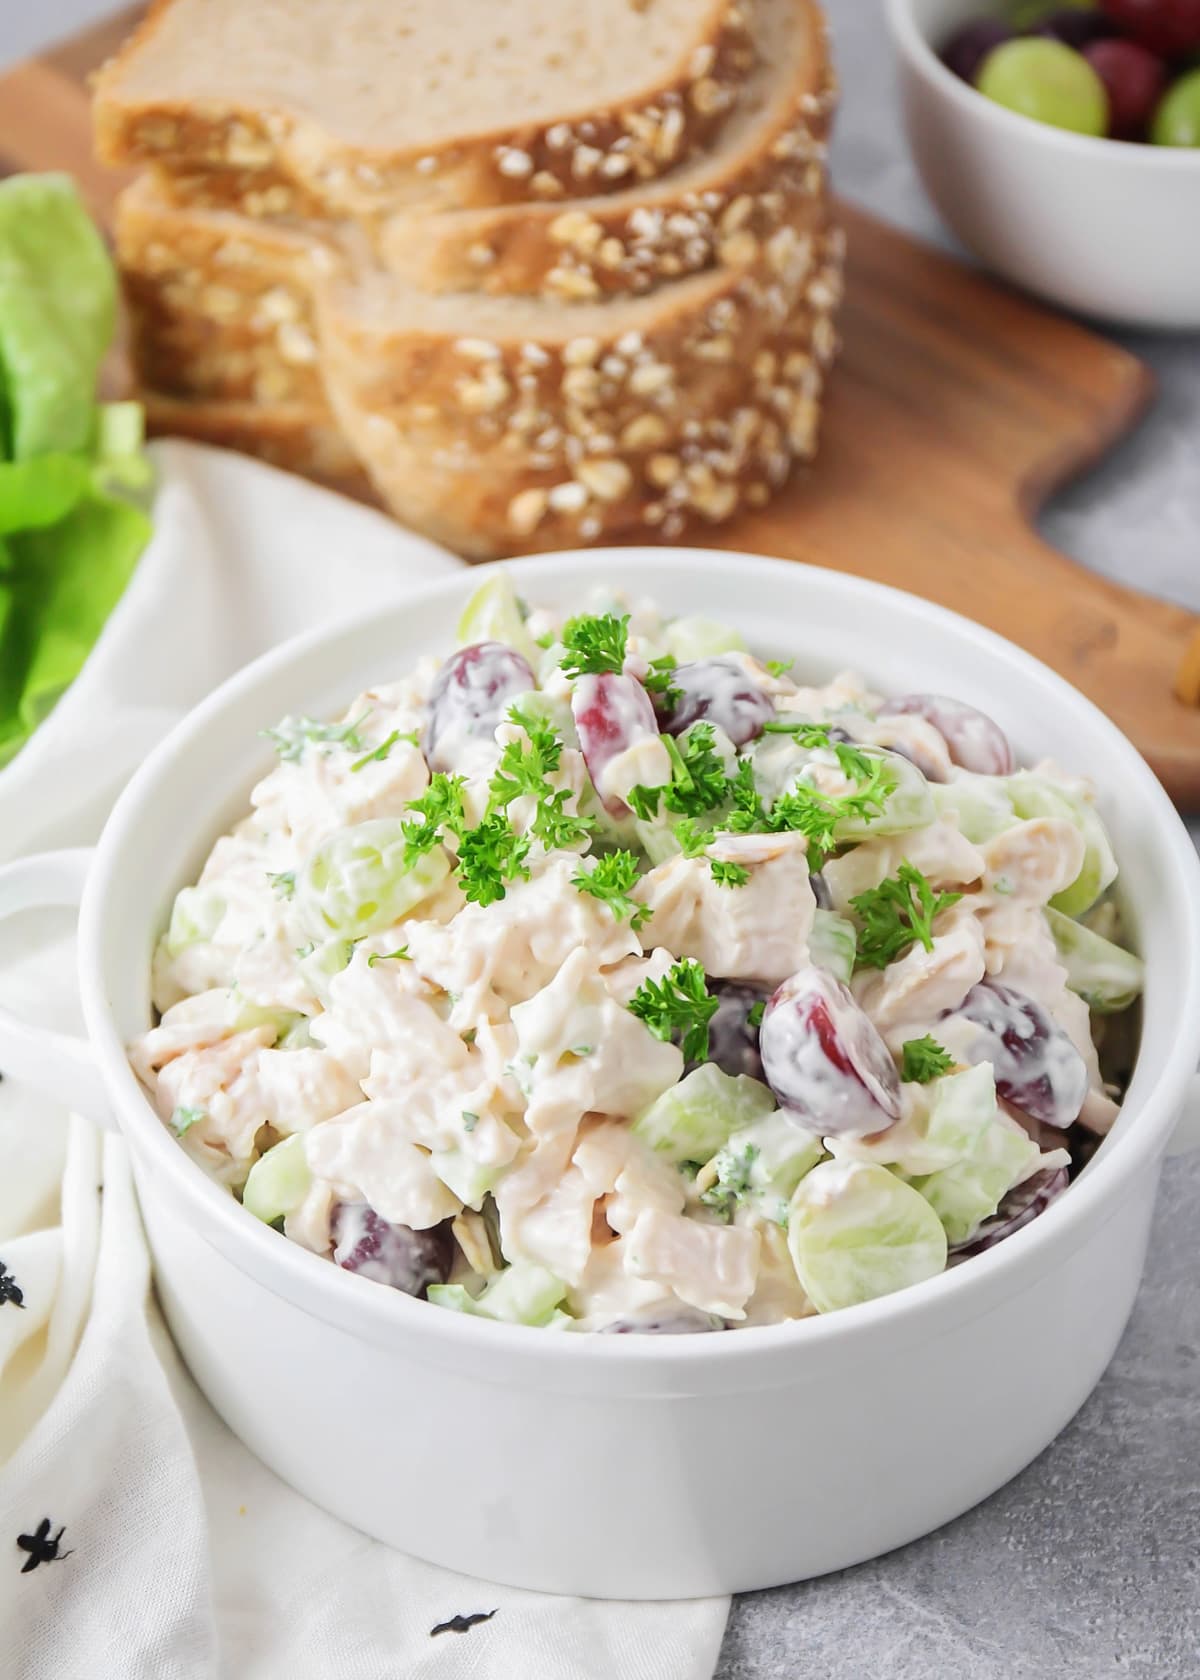 Chicken salad with grapes in a white bowl.